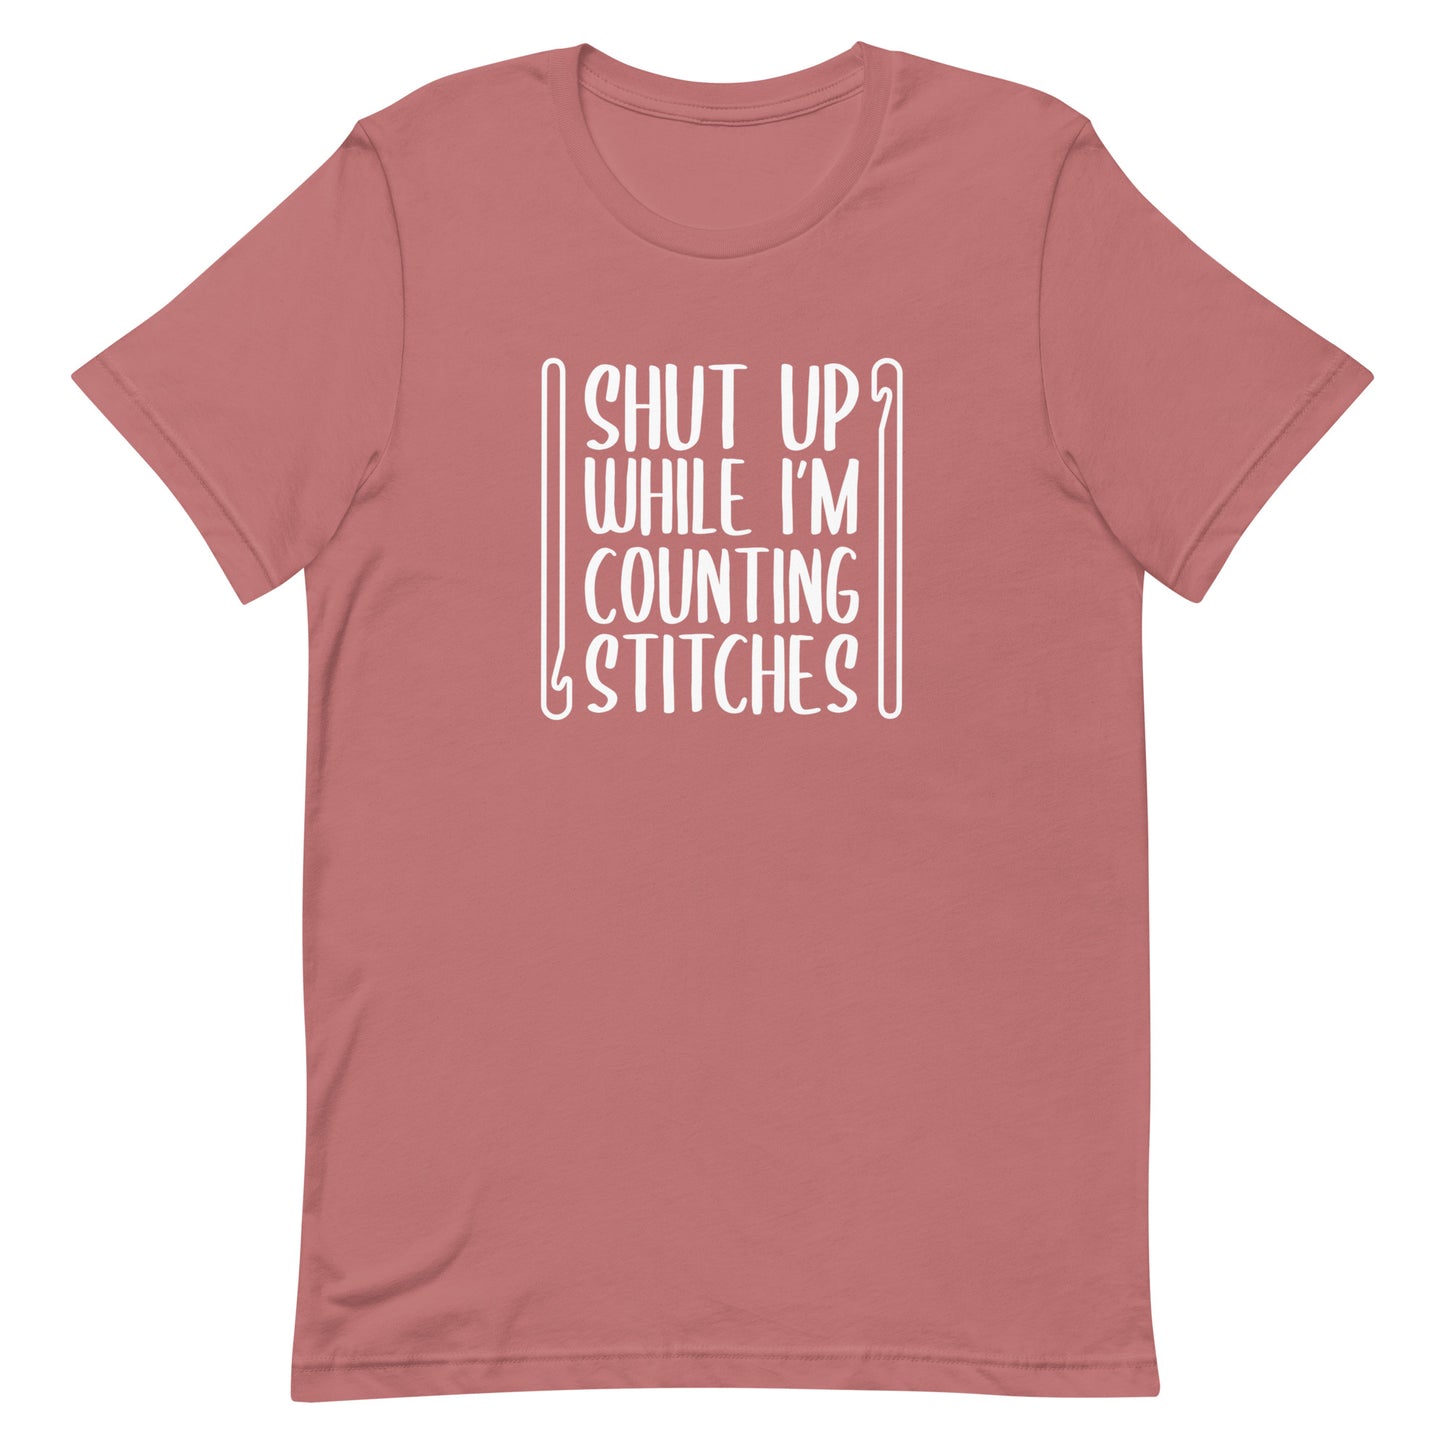 A dusky pink crewneck t-shirt featuring white text that reads "Shut up while I'm counting stitches." The text is framed by a crochet hook to the left and right.